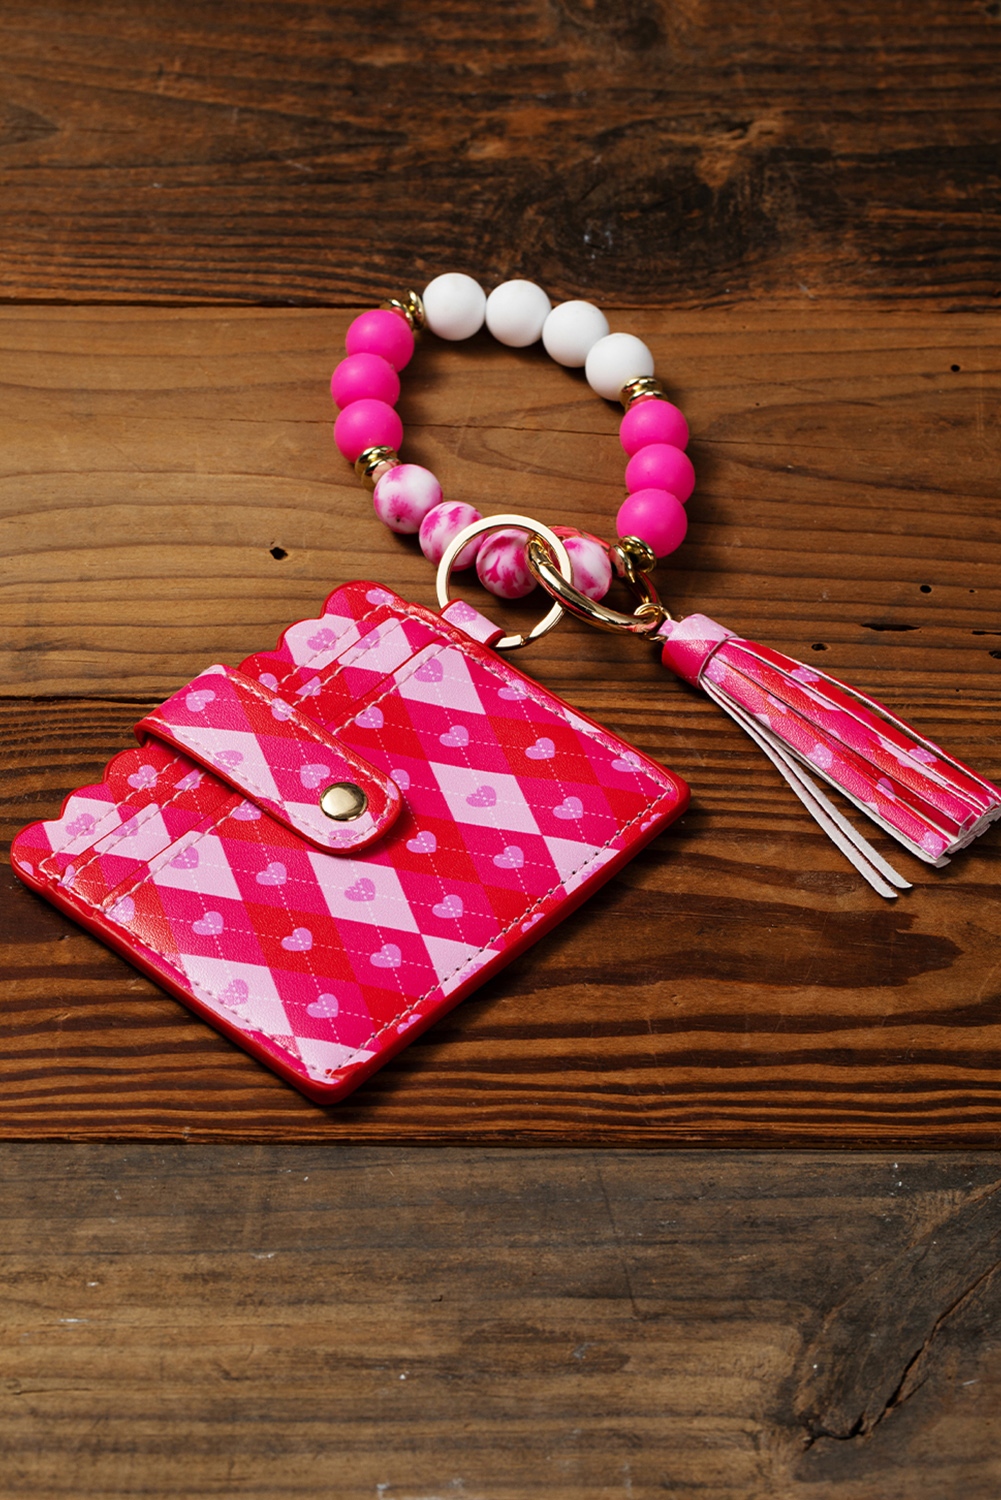  Rose Red VALENTINE PU Card Bag Key Chain with Silicone Bracelet